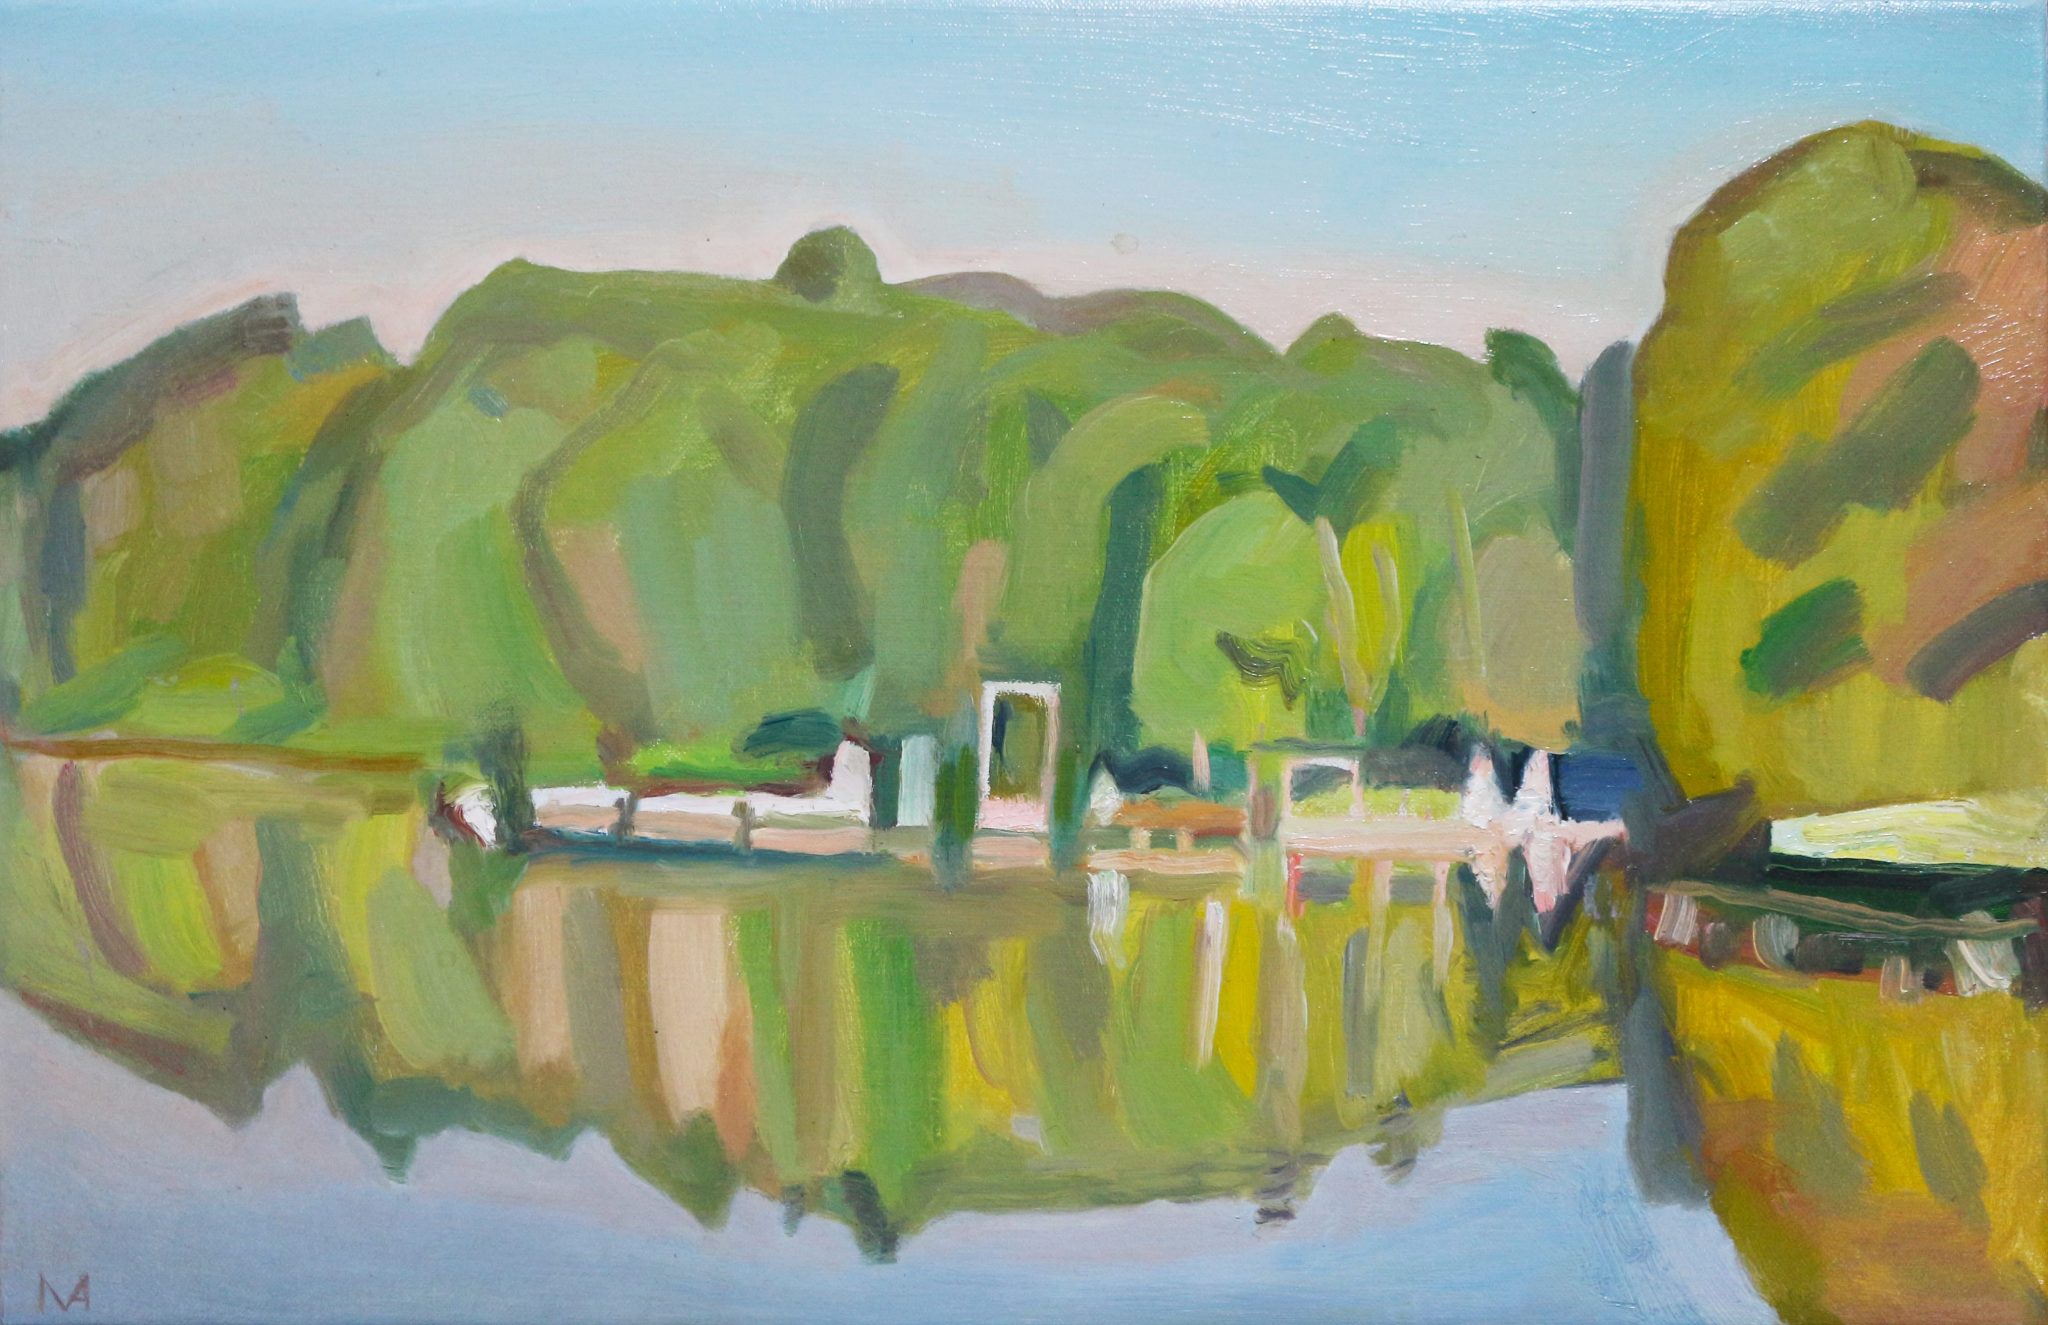 Oil on canvas painting showing distant buildings by a lake on Mt. Gretna by Martha Armstrong